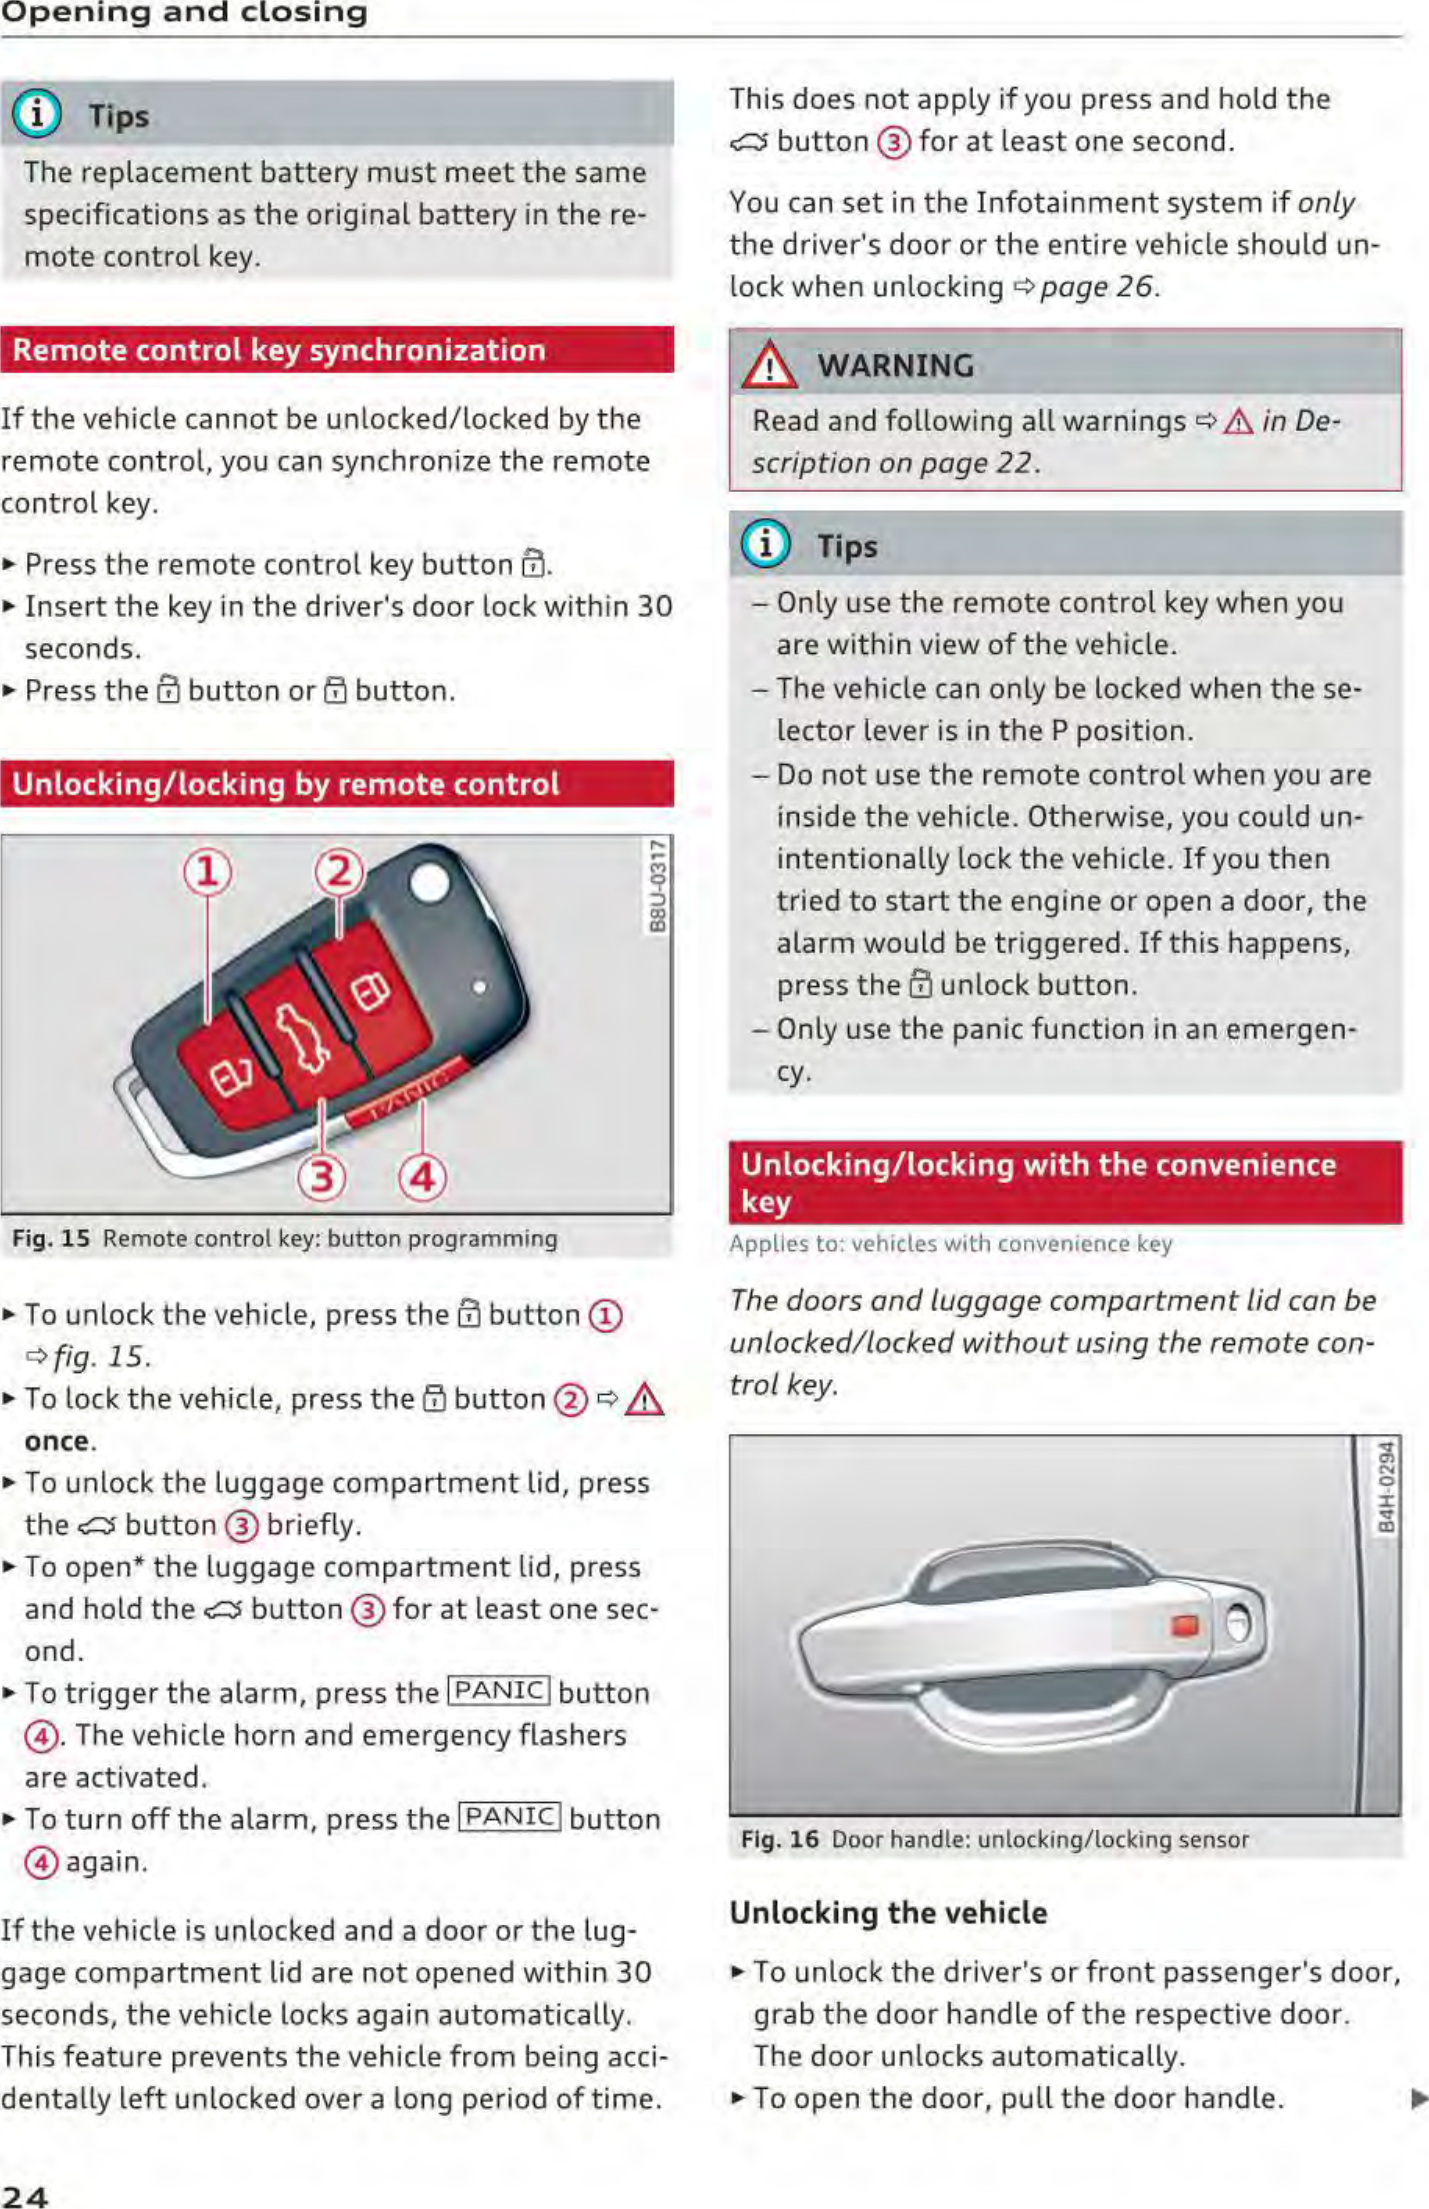 Page 26 of Robert Bosch Car Multimedia AUFPK20 Instrument cluster with immobilizer User Manual part 1